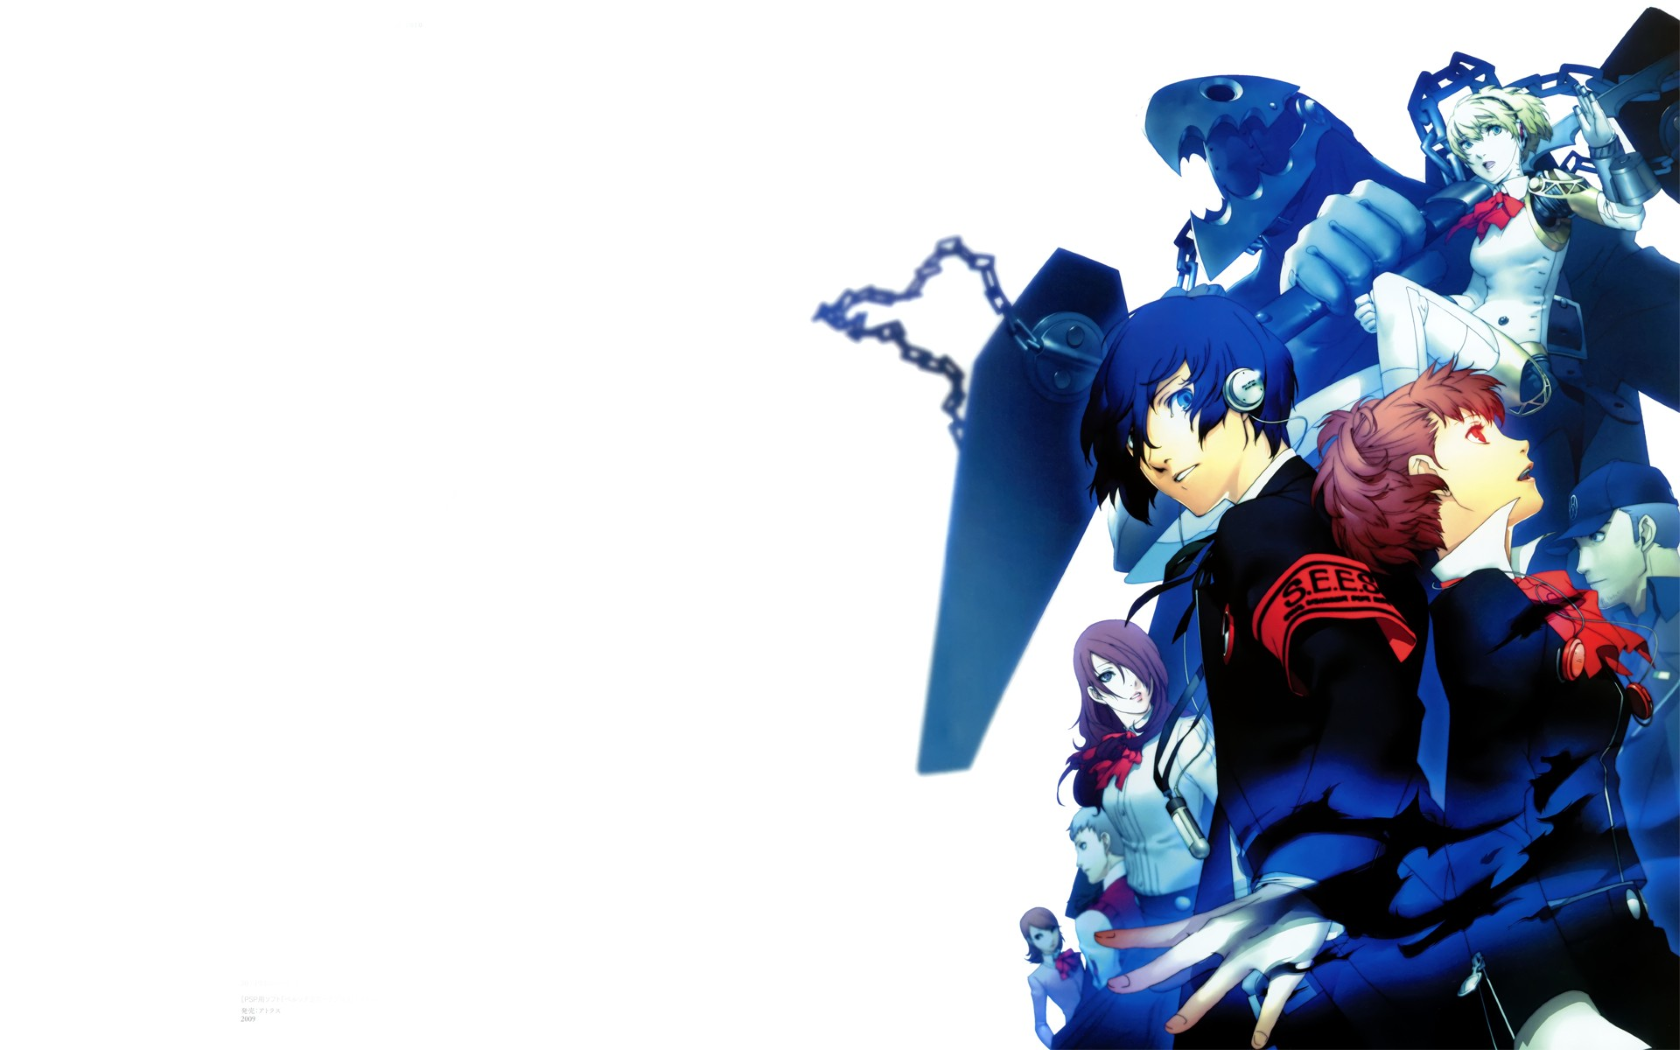 General 1680x1050 Persona 3 Persona series anime simple background white background anime boys anime girls video games anime games